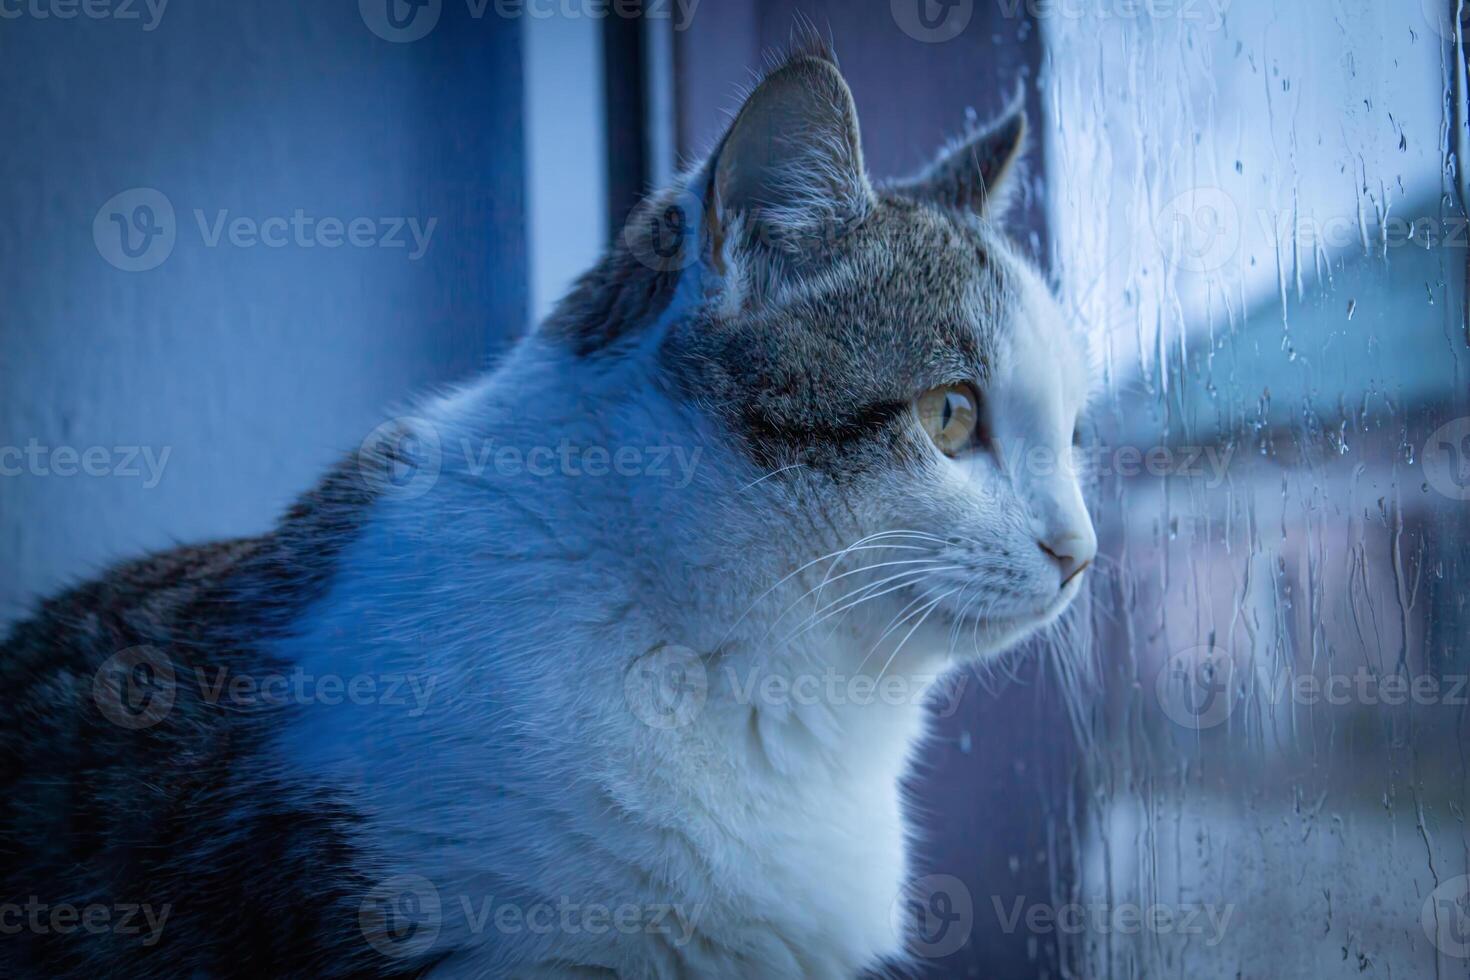 A cat looks out the window on a rainy day, soft focus photo